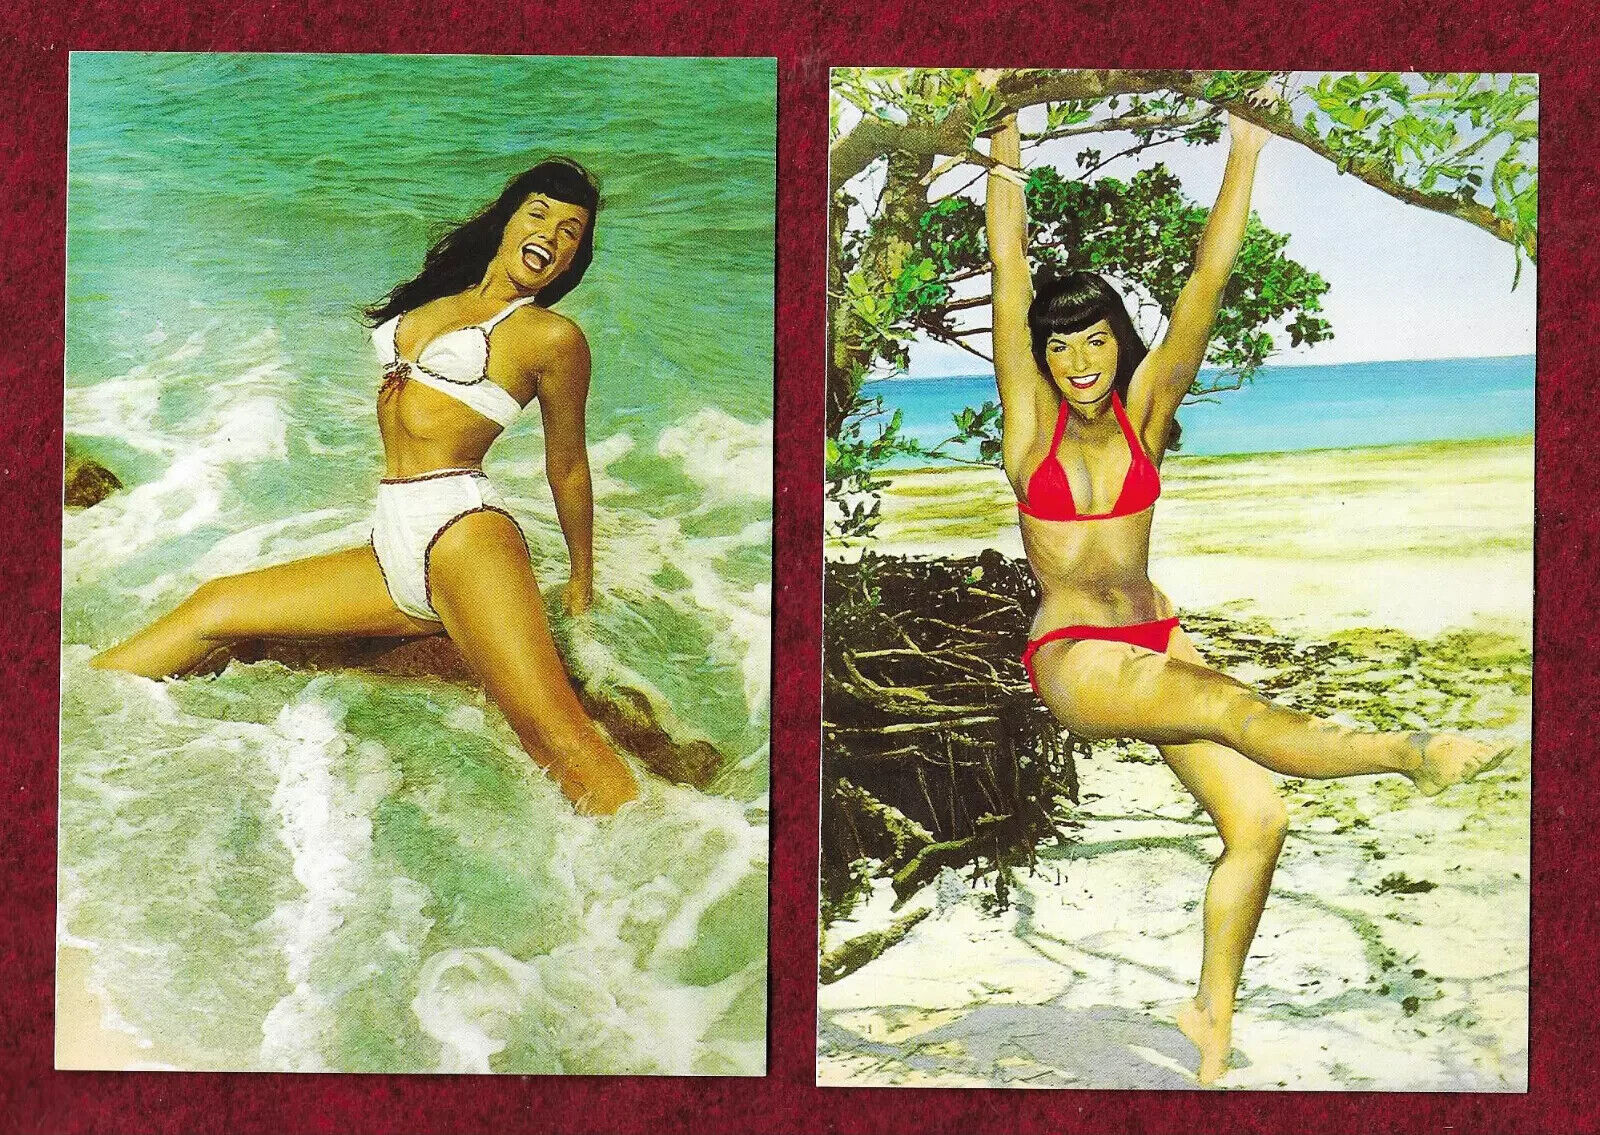 2 Bettie Page  1950s Photos by Bunny Yeager on Unused 1996 Mint Postcards  J